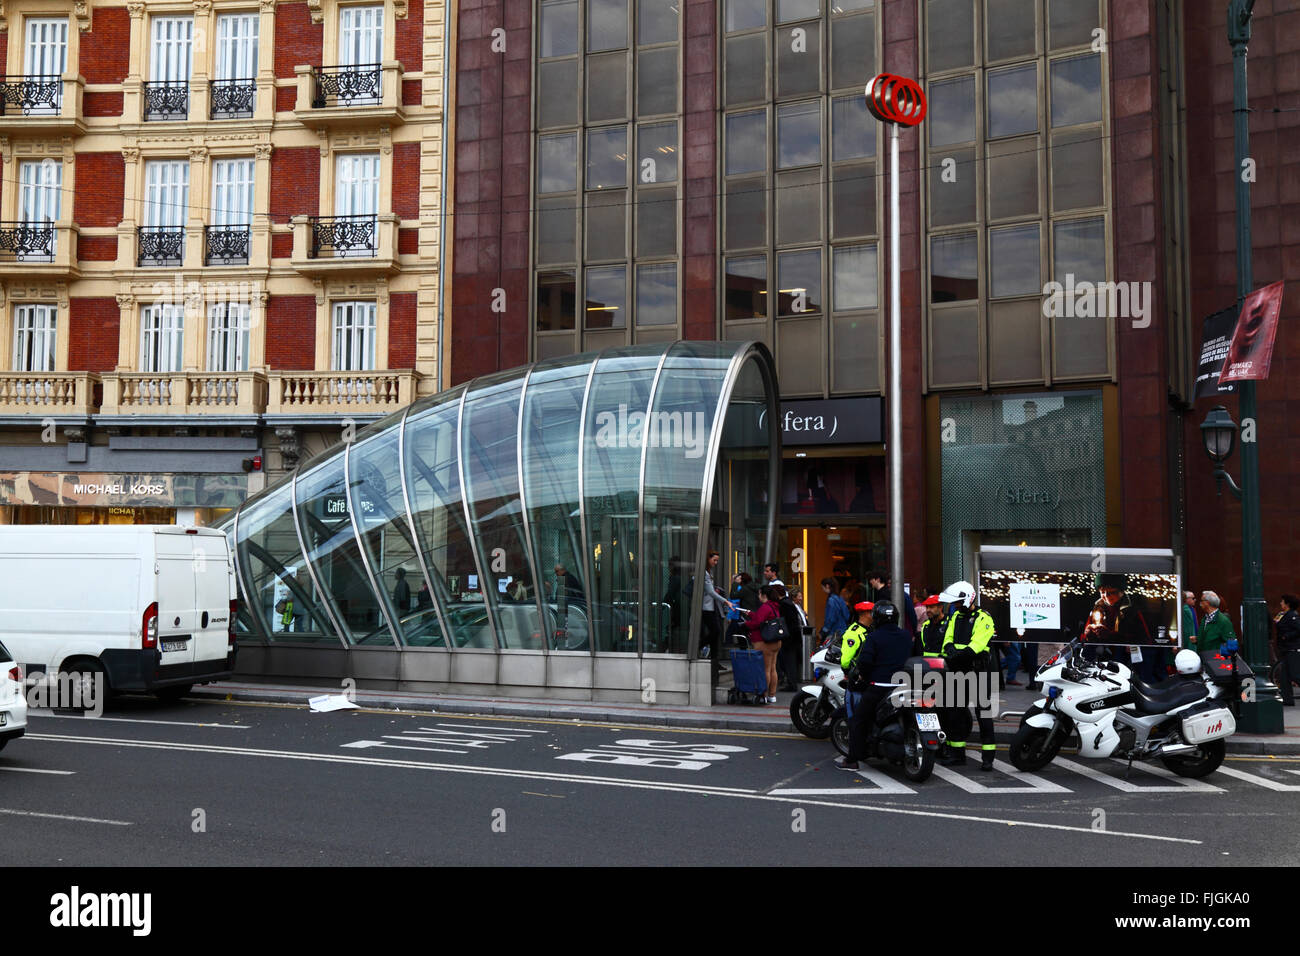 Police outside entrance to L-1 Metro station in Plaza Moyua, Bilbao, Basque Country, Spain Stock Photo